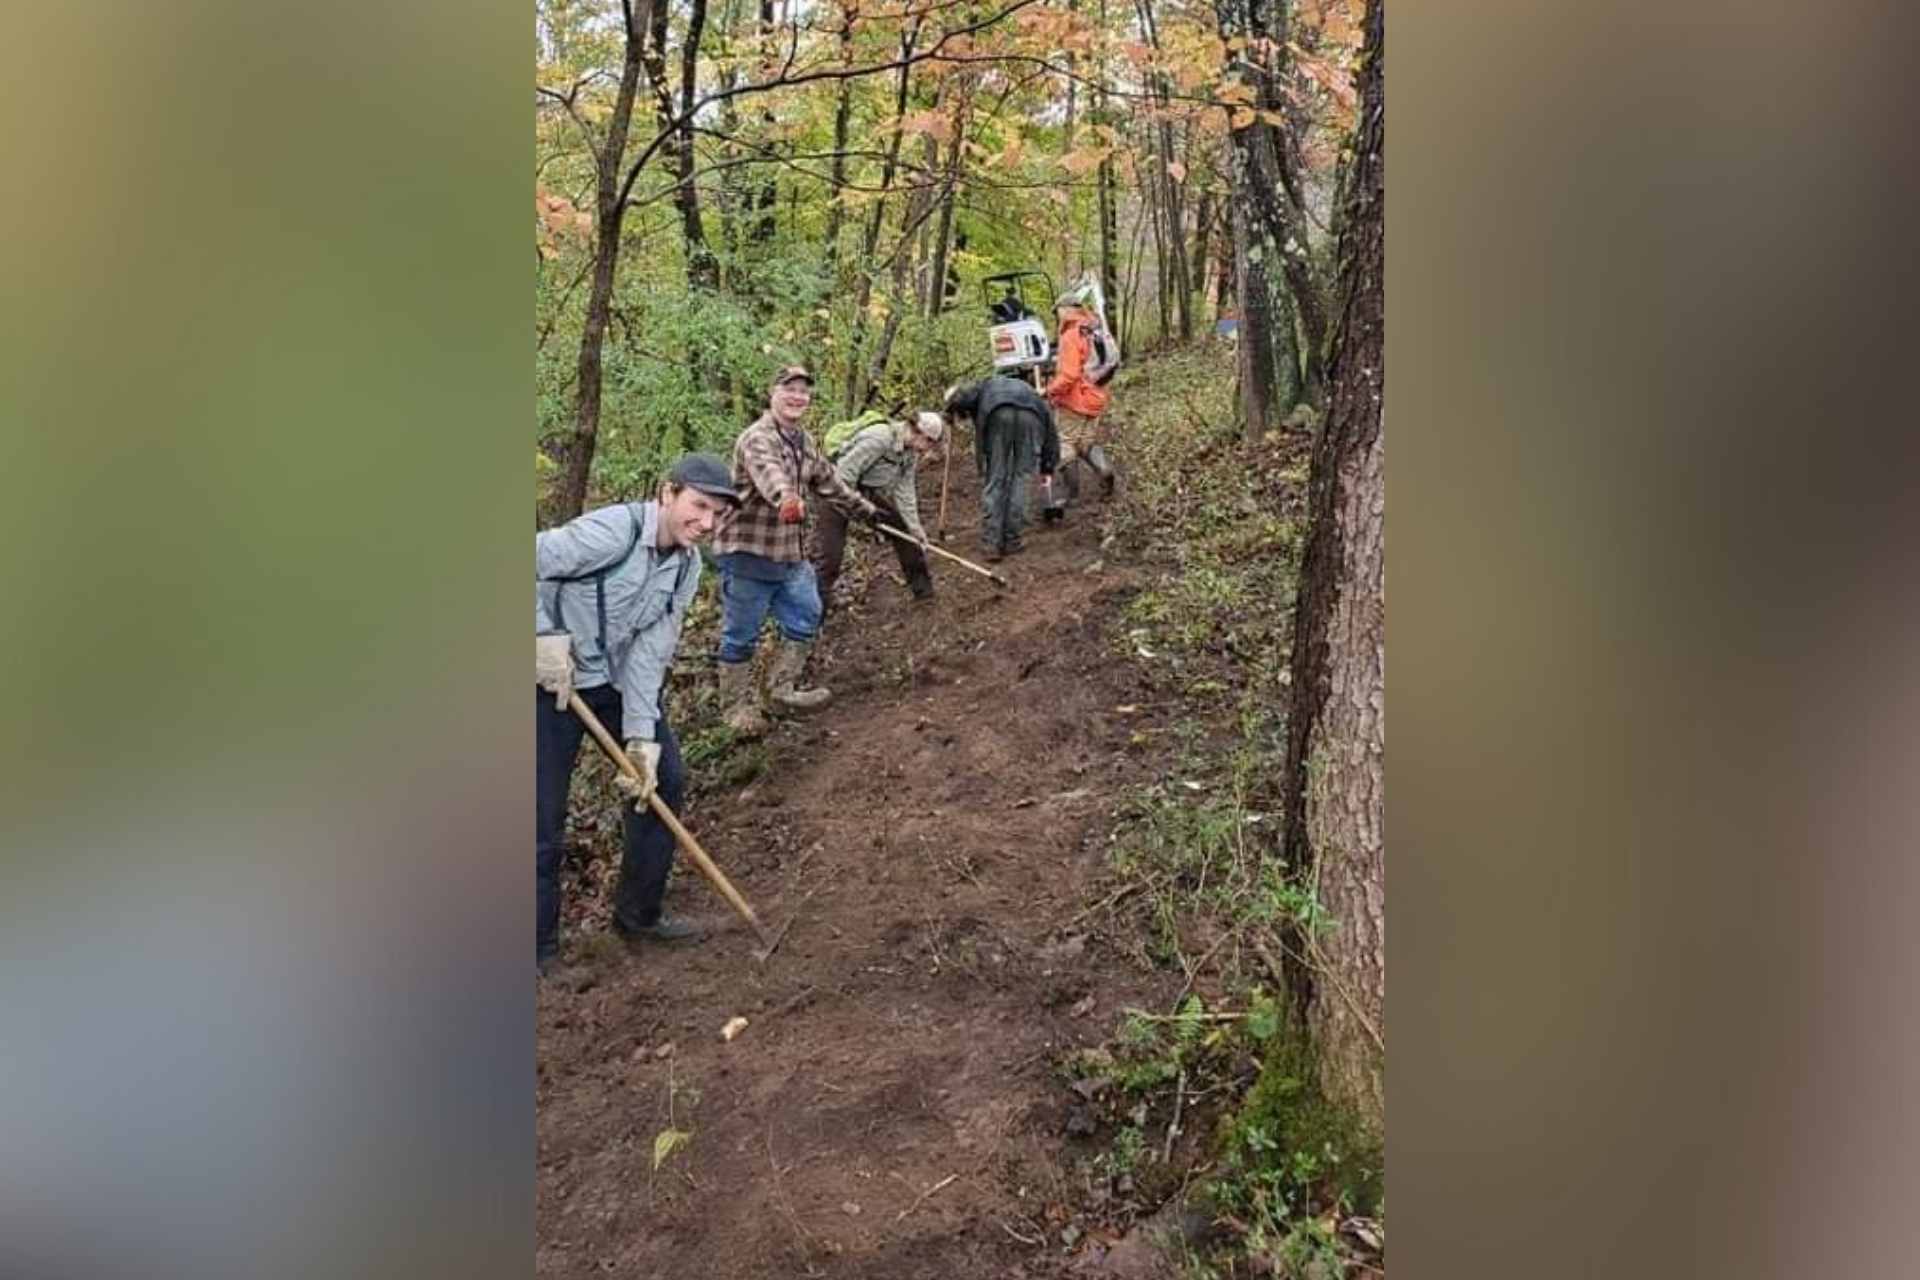 Upshur County Trails volunteers work on the new addition to the Upshur Trails system / Photo submitted by Rachel Weber